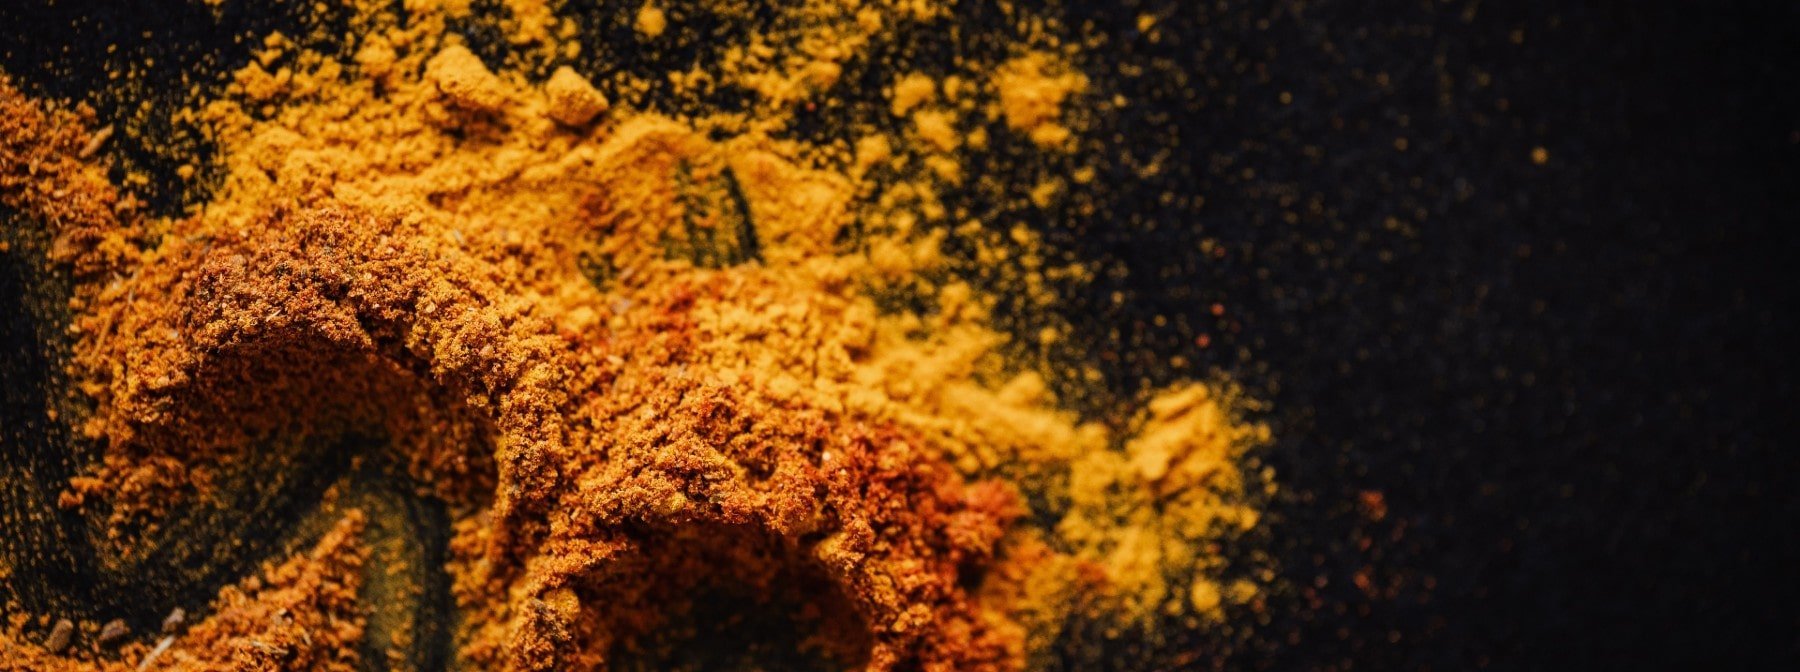 6 Benefits Of Turmeric | What Is It? How Much To Take?